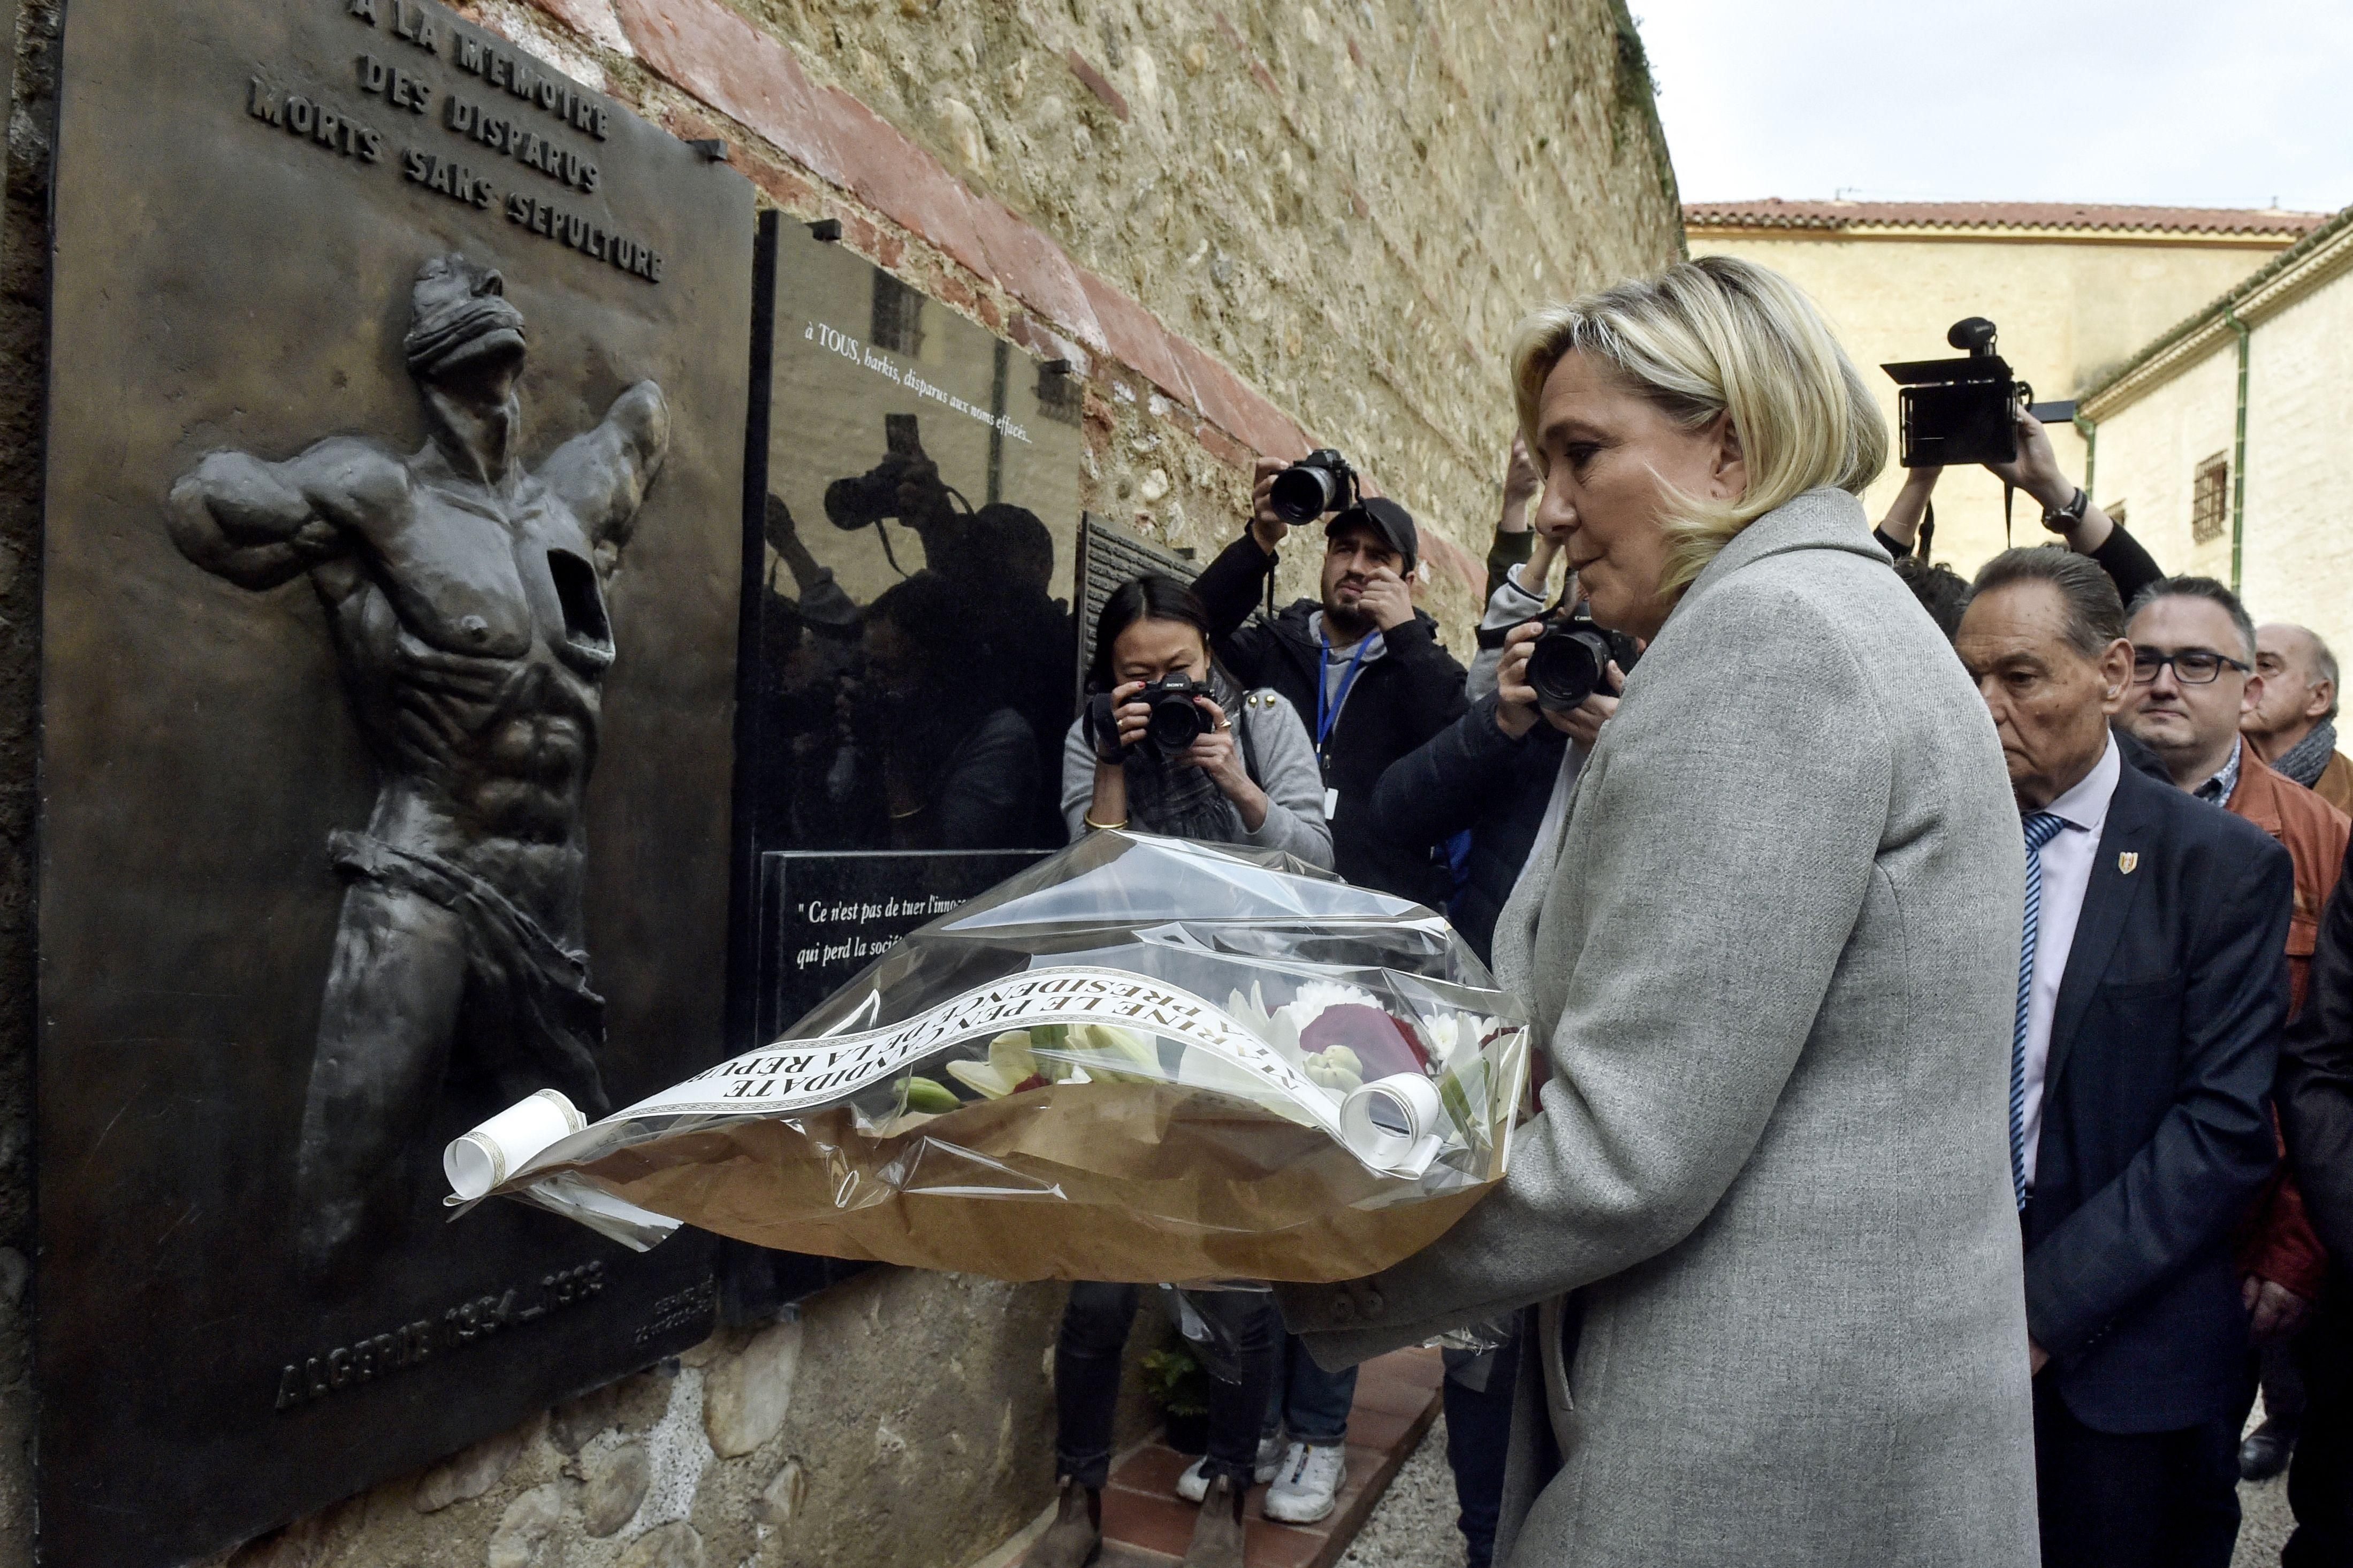 French far-right presidential candidate Marine Le Pen lays flowers at the Wall of the Disappeared, a memorial to colonists in Algeria, during a campaign stop in Perpignan, southern France, on April 8, 2022. 